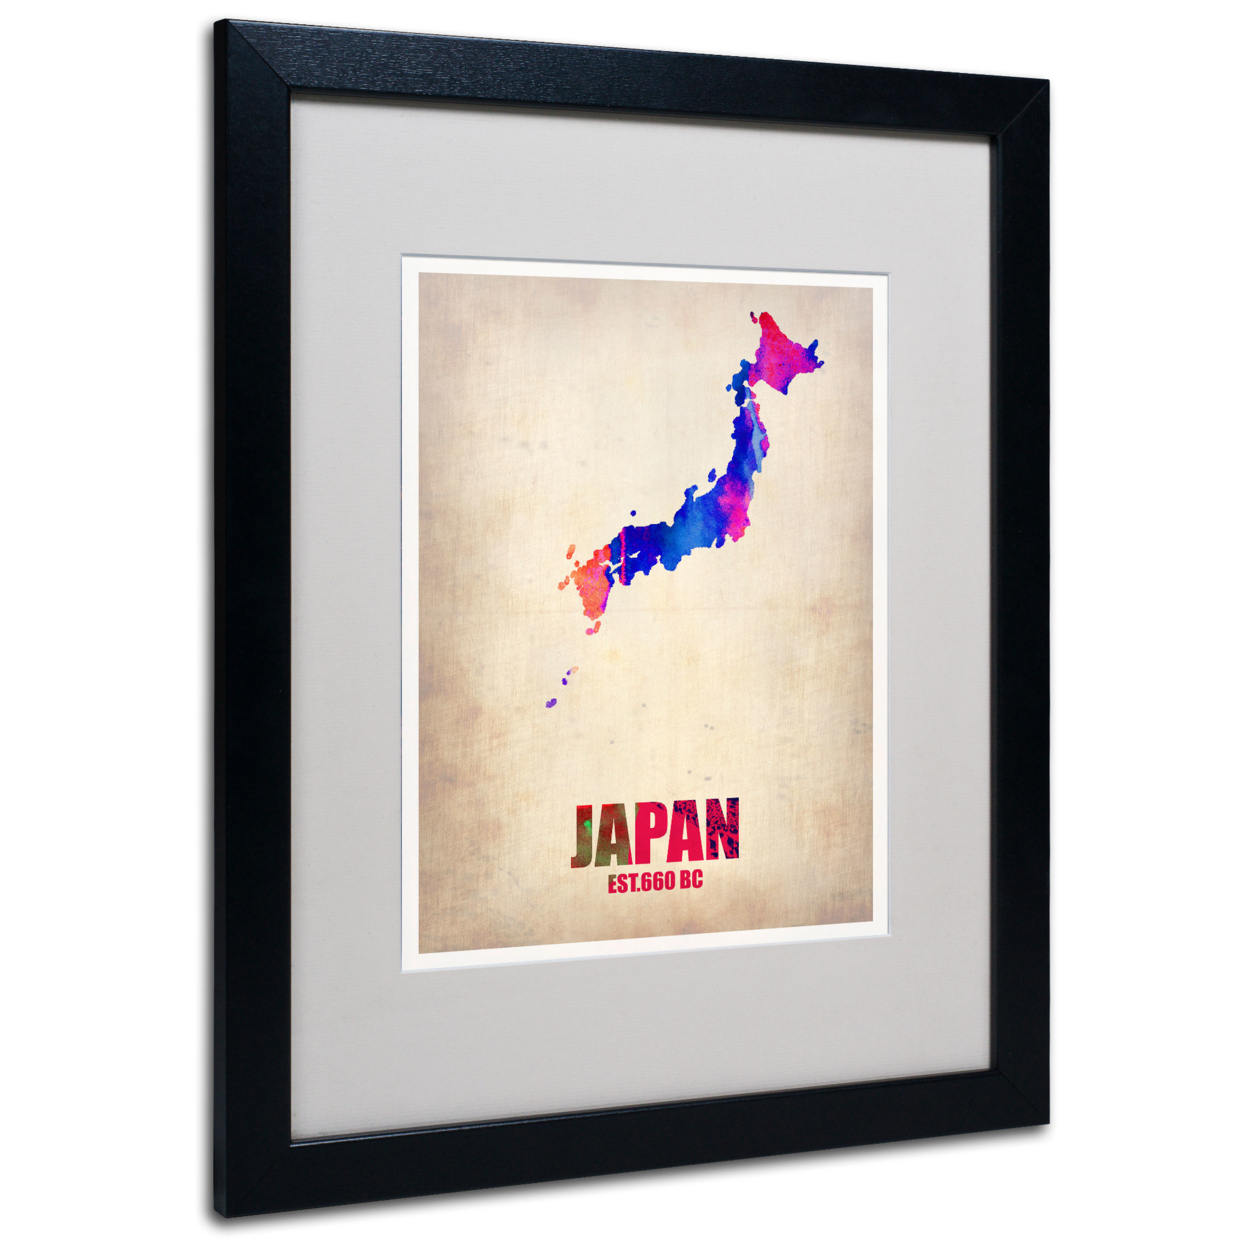 Naxart 'Japan Watercolor Map' Black Wooden Framed Art 18 X 22 Inches